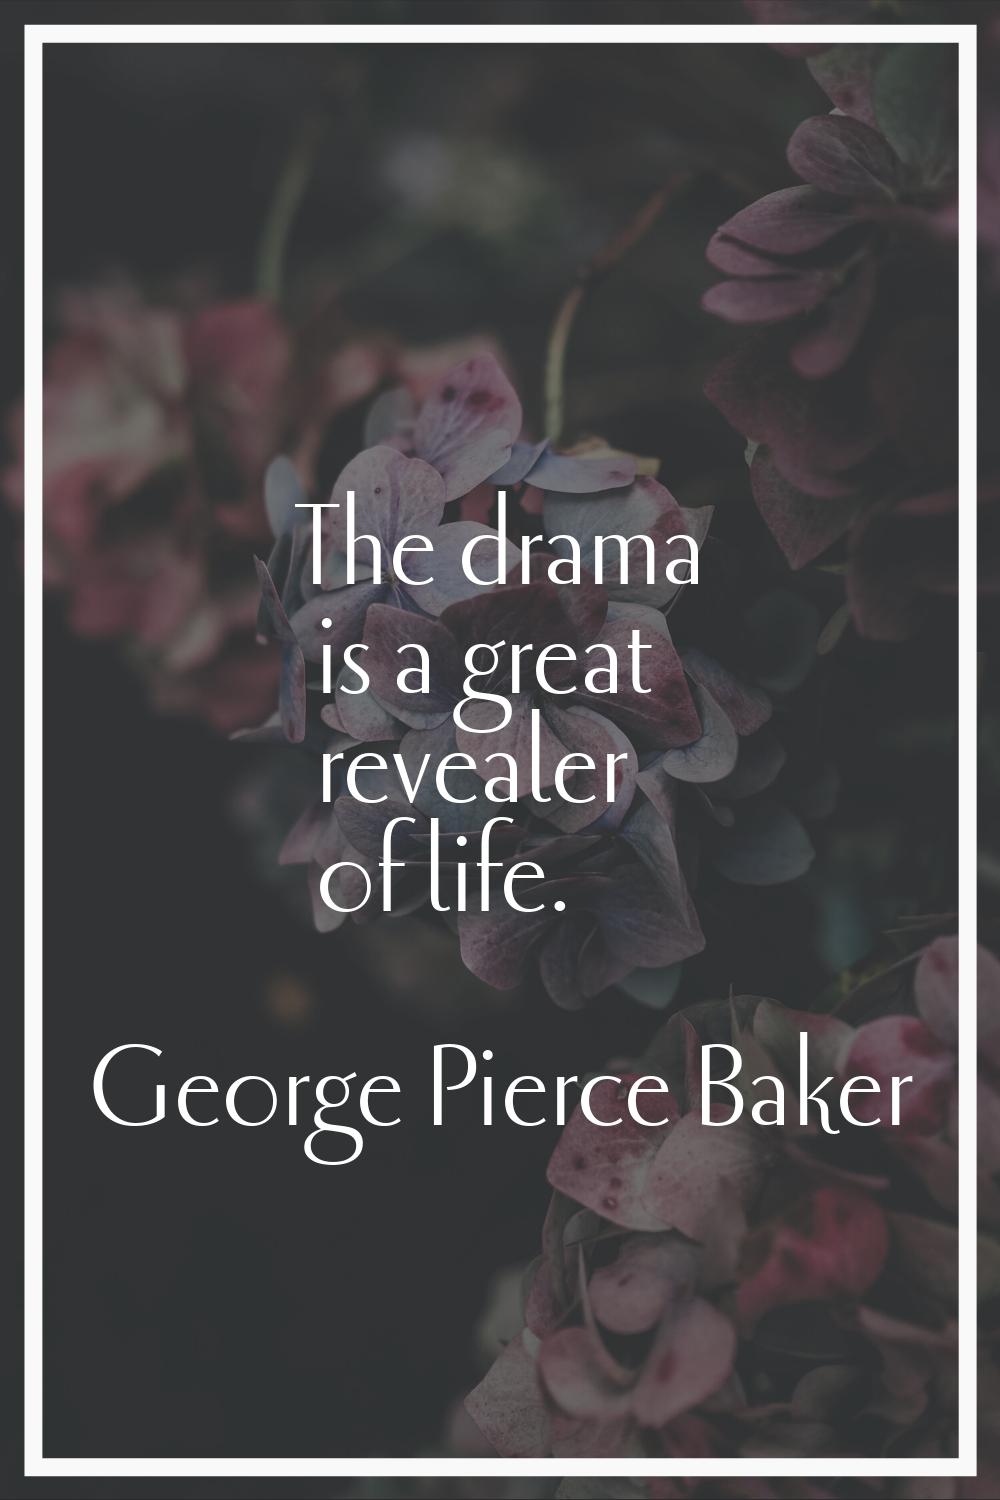 The drama is a great revealer of life.